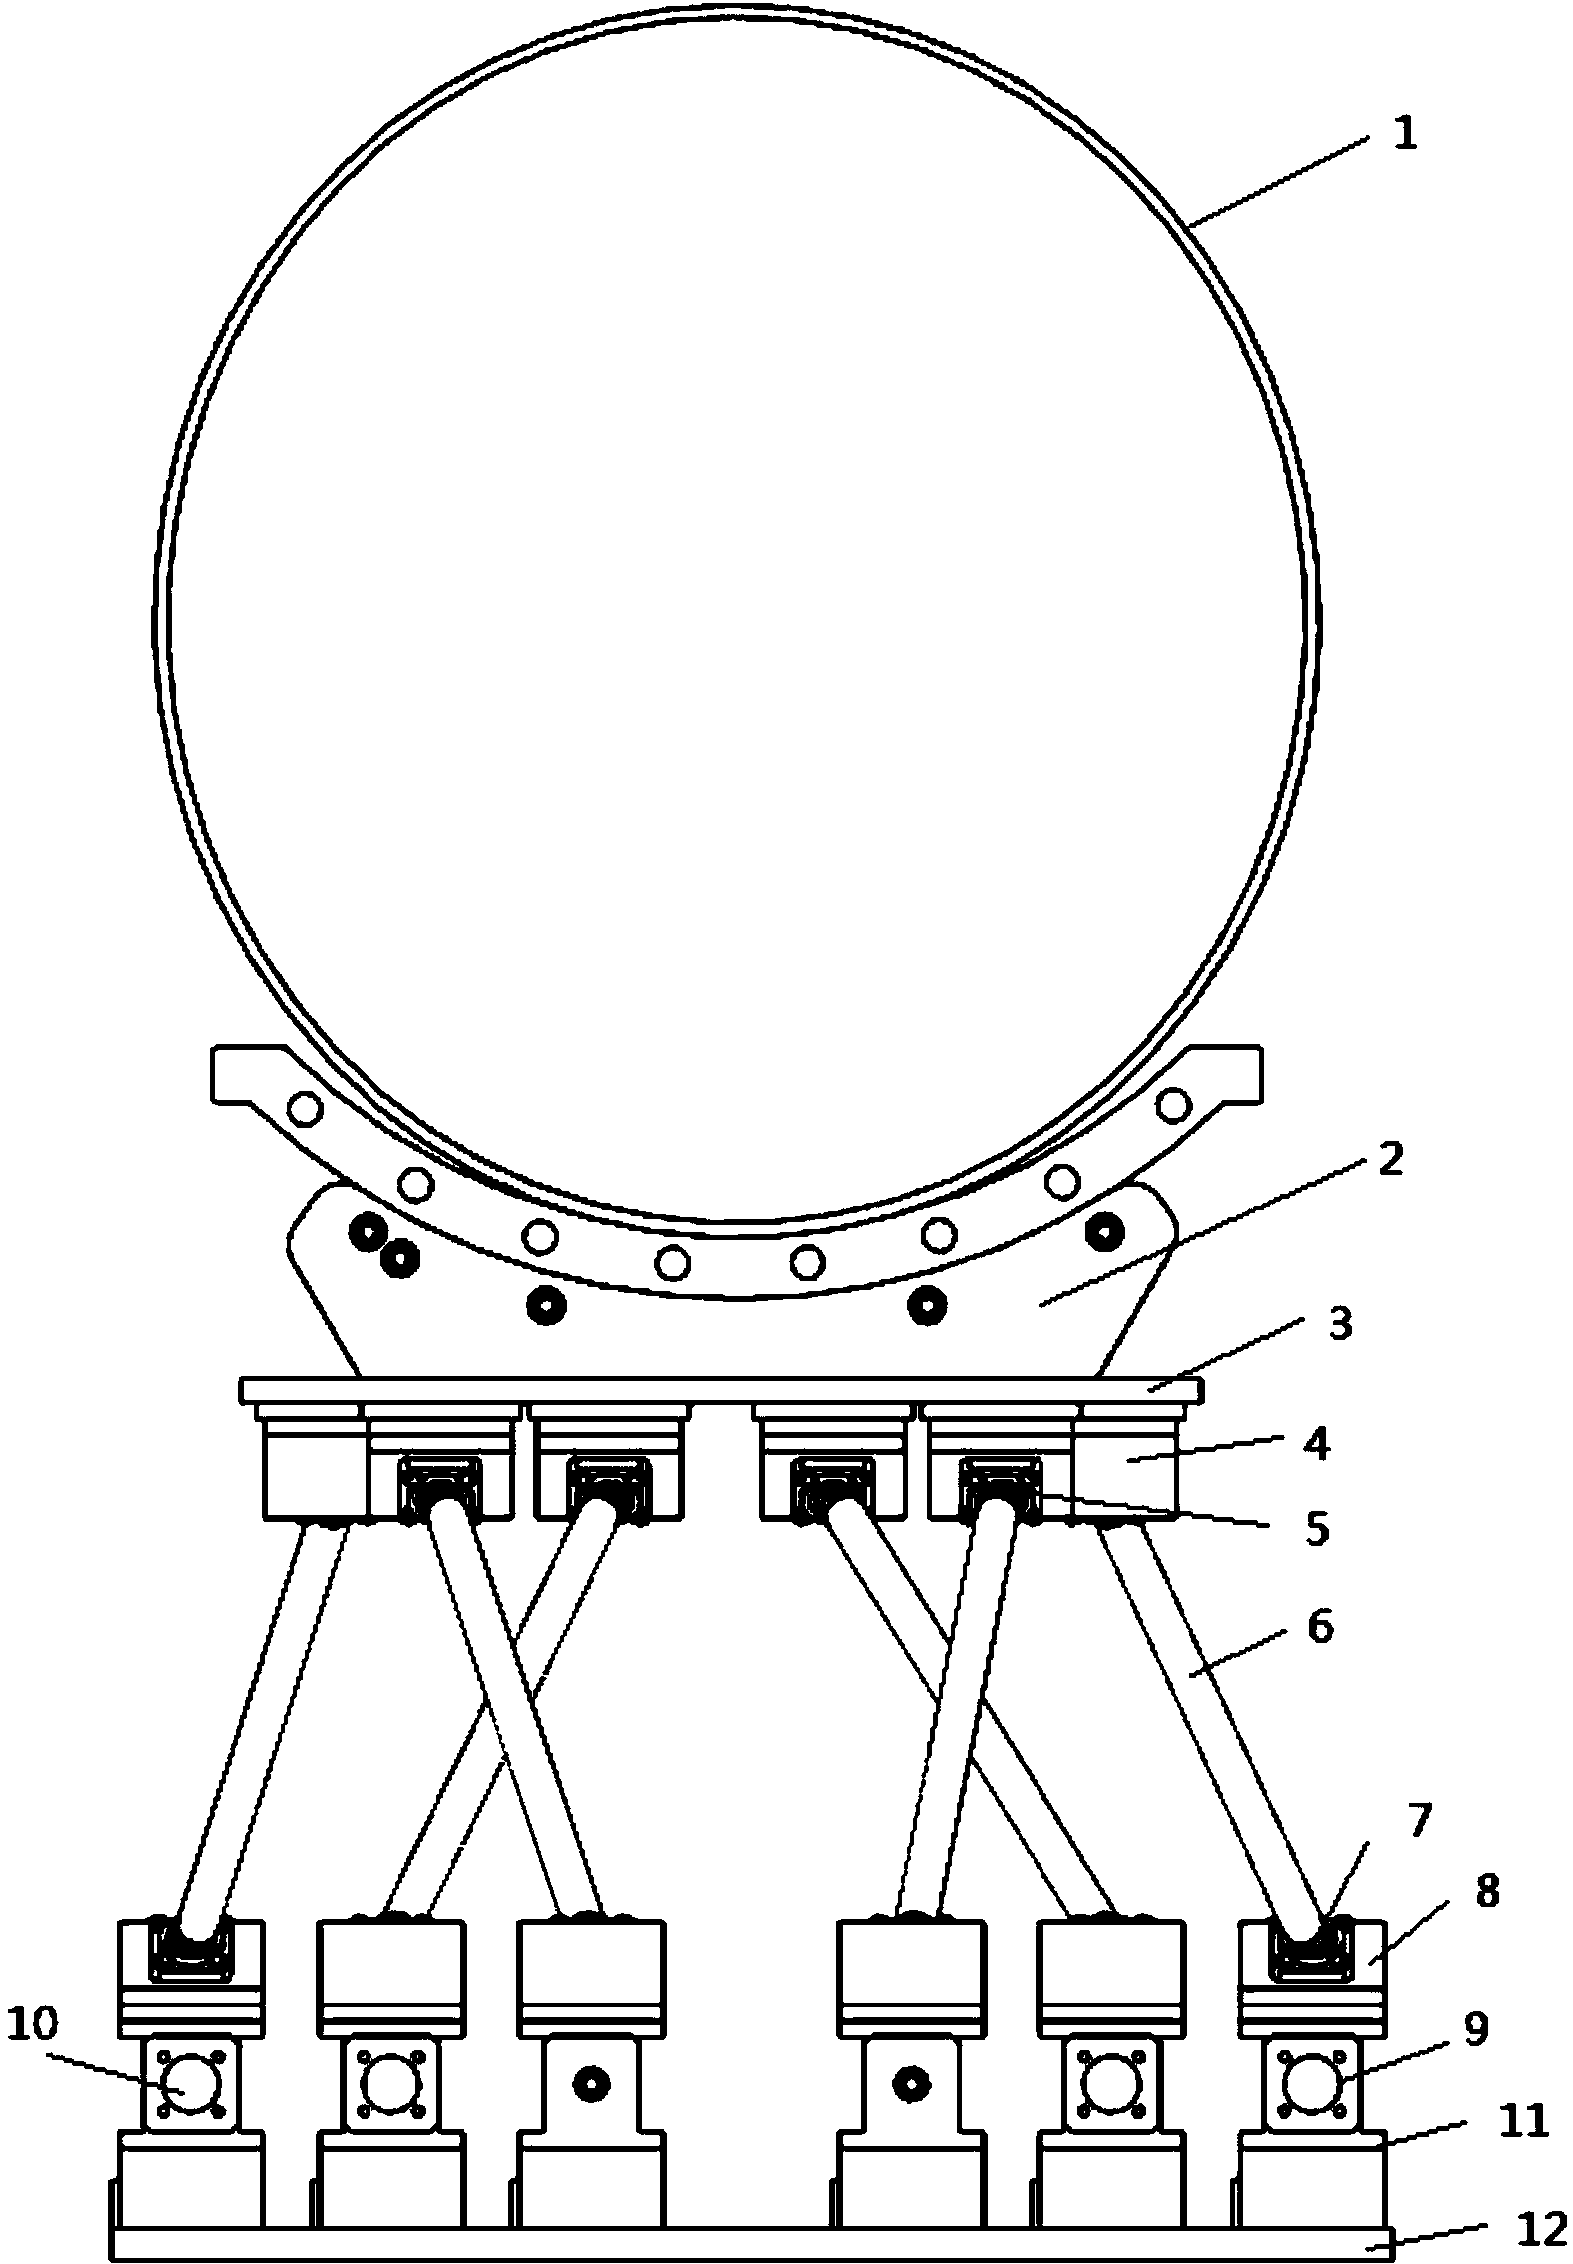 Six-degree-of-freedom positioning gesture adjusting equipment used for automatic assembling of large barrel-shaped thin-wall construction member